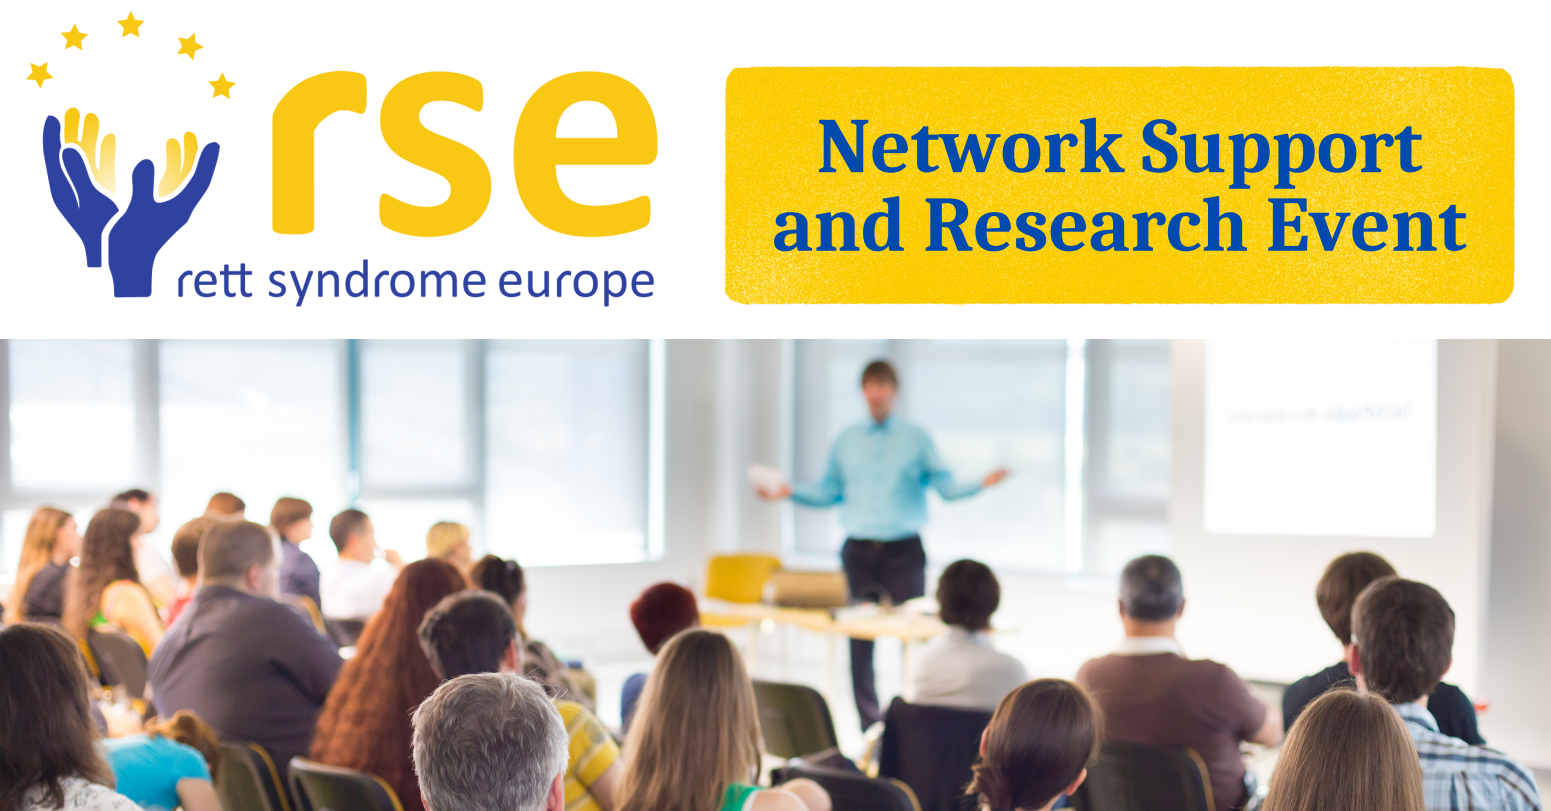 Network Support and Research Event comming soon!